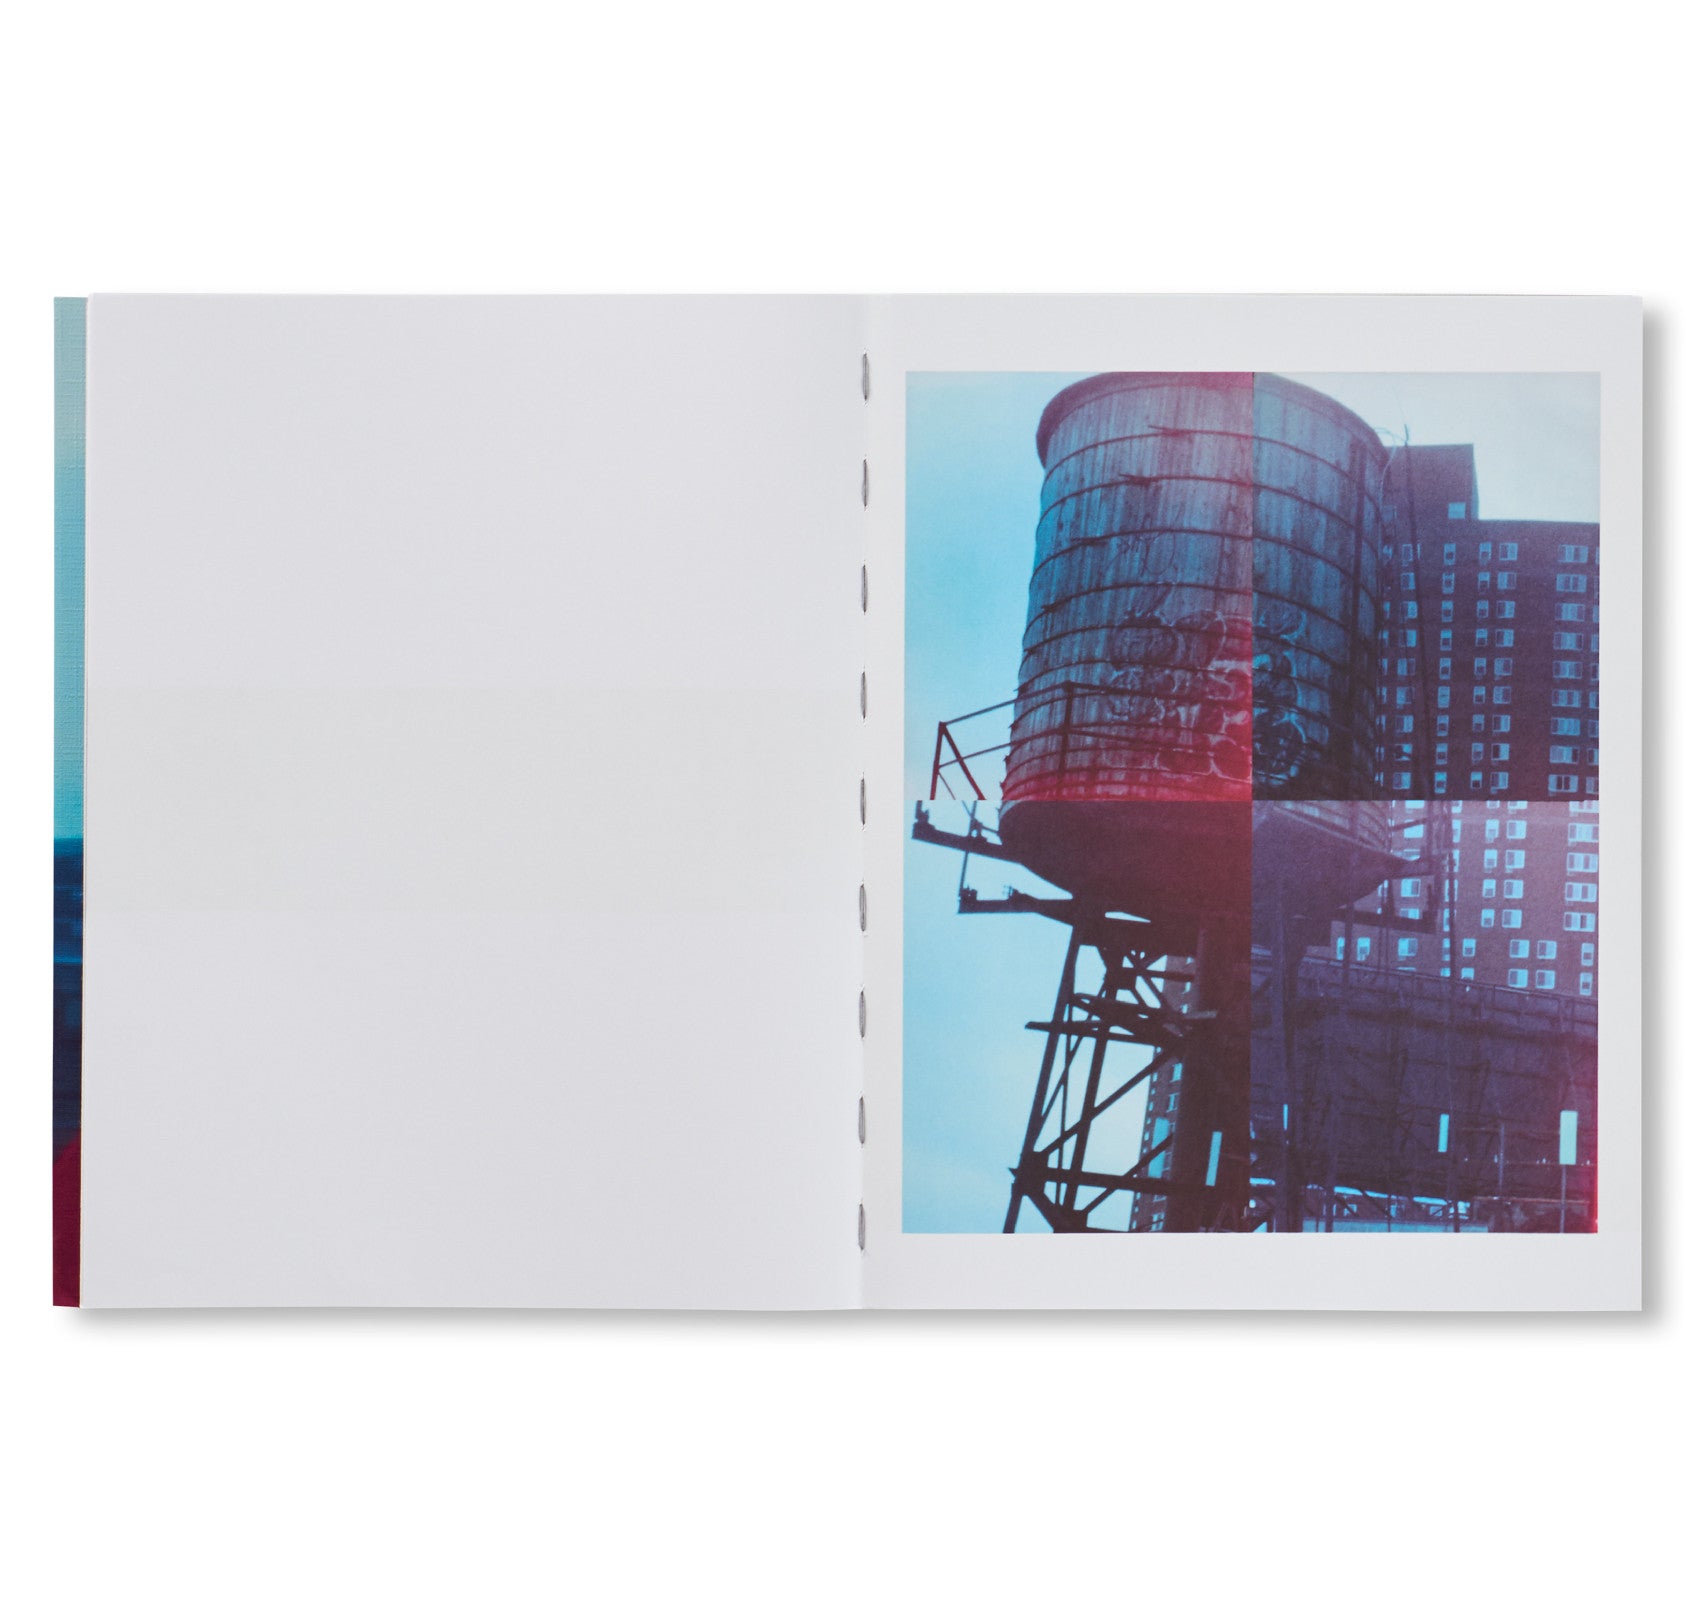 THE NARCISSISTIC CITY by Takashi Homma [SIGNED]